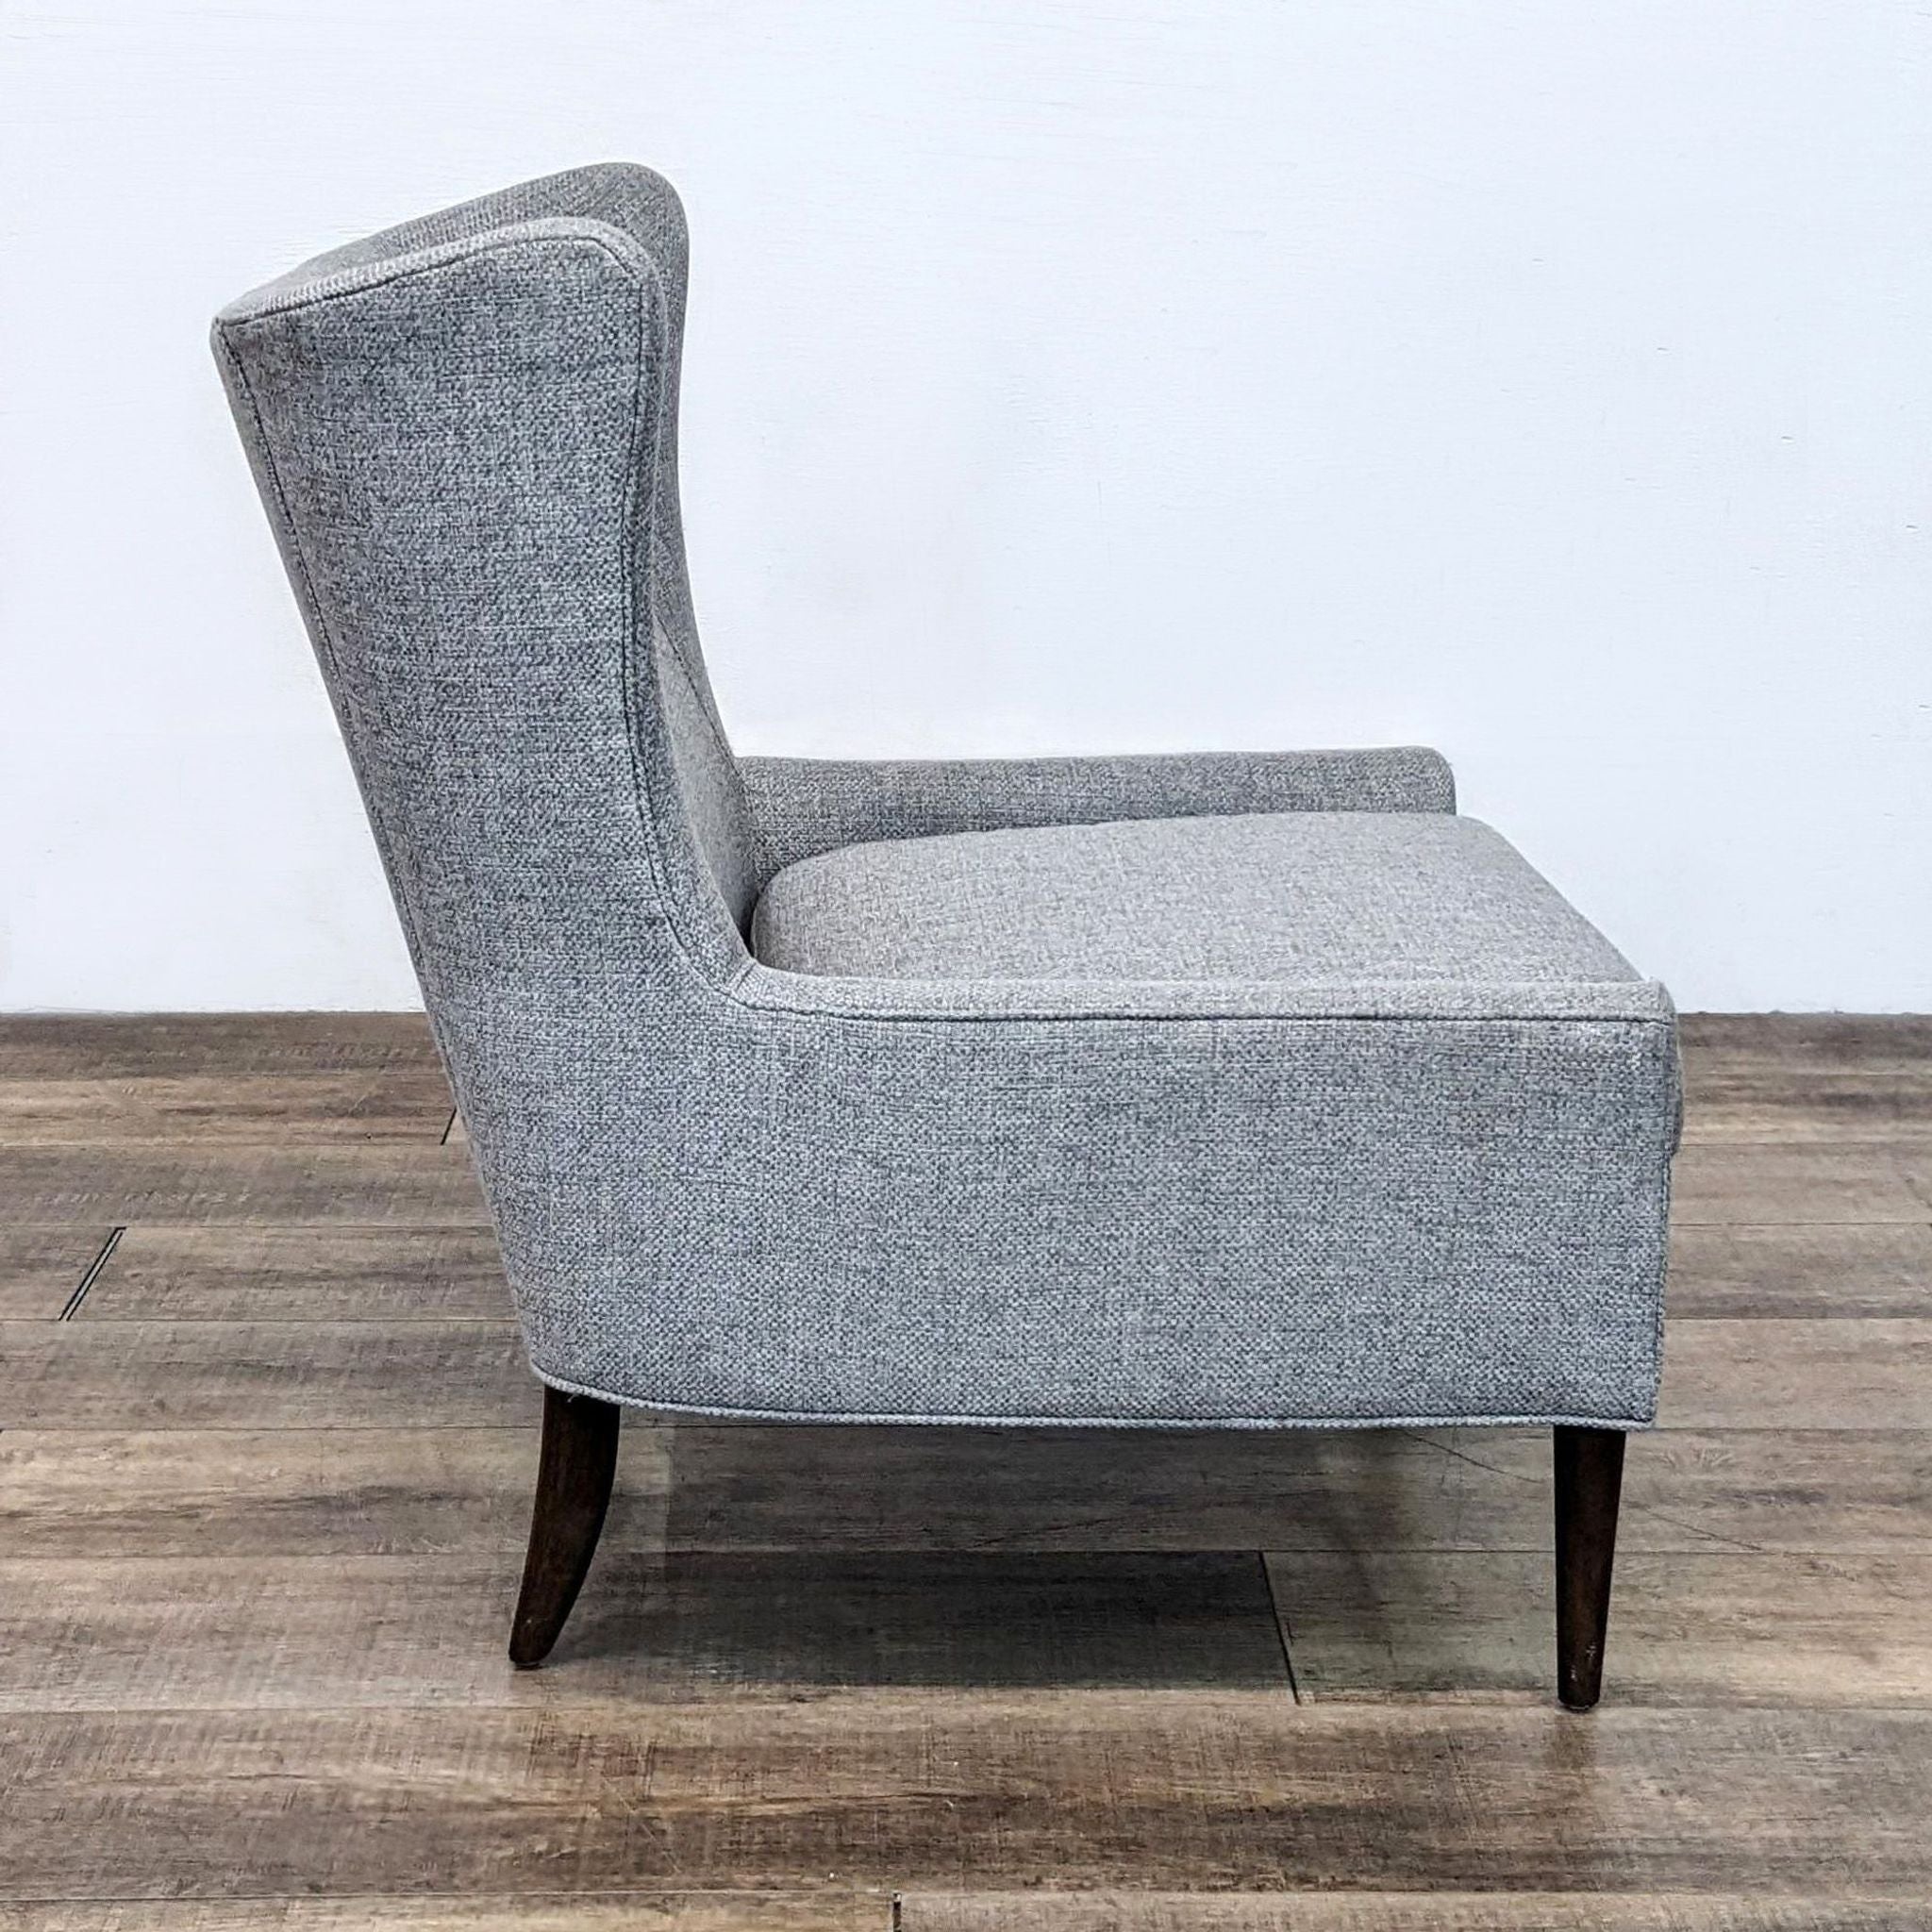 Side view of Four Hands' Marlow chair, displaying the contemporary wing chair silhouette and elegant wood legs in a lounge setting.